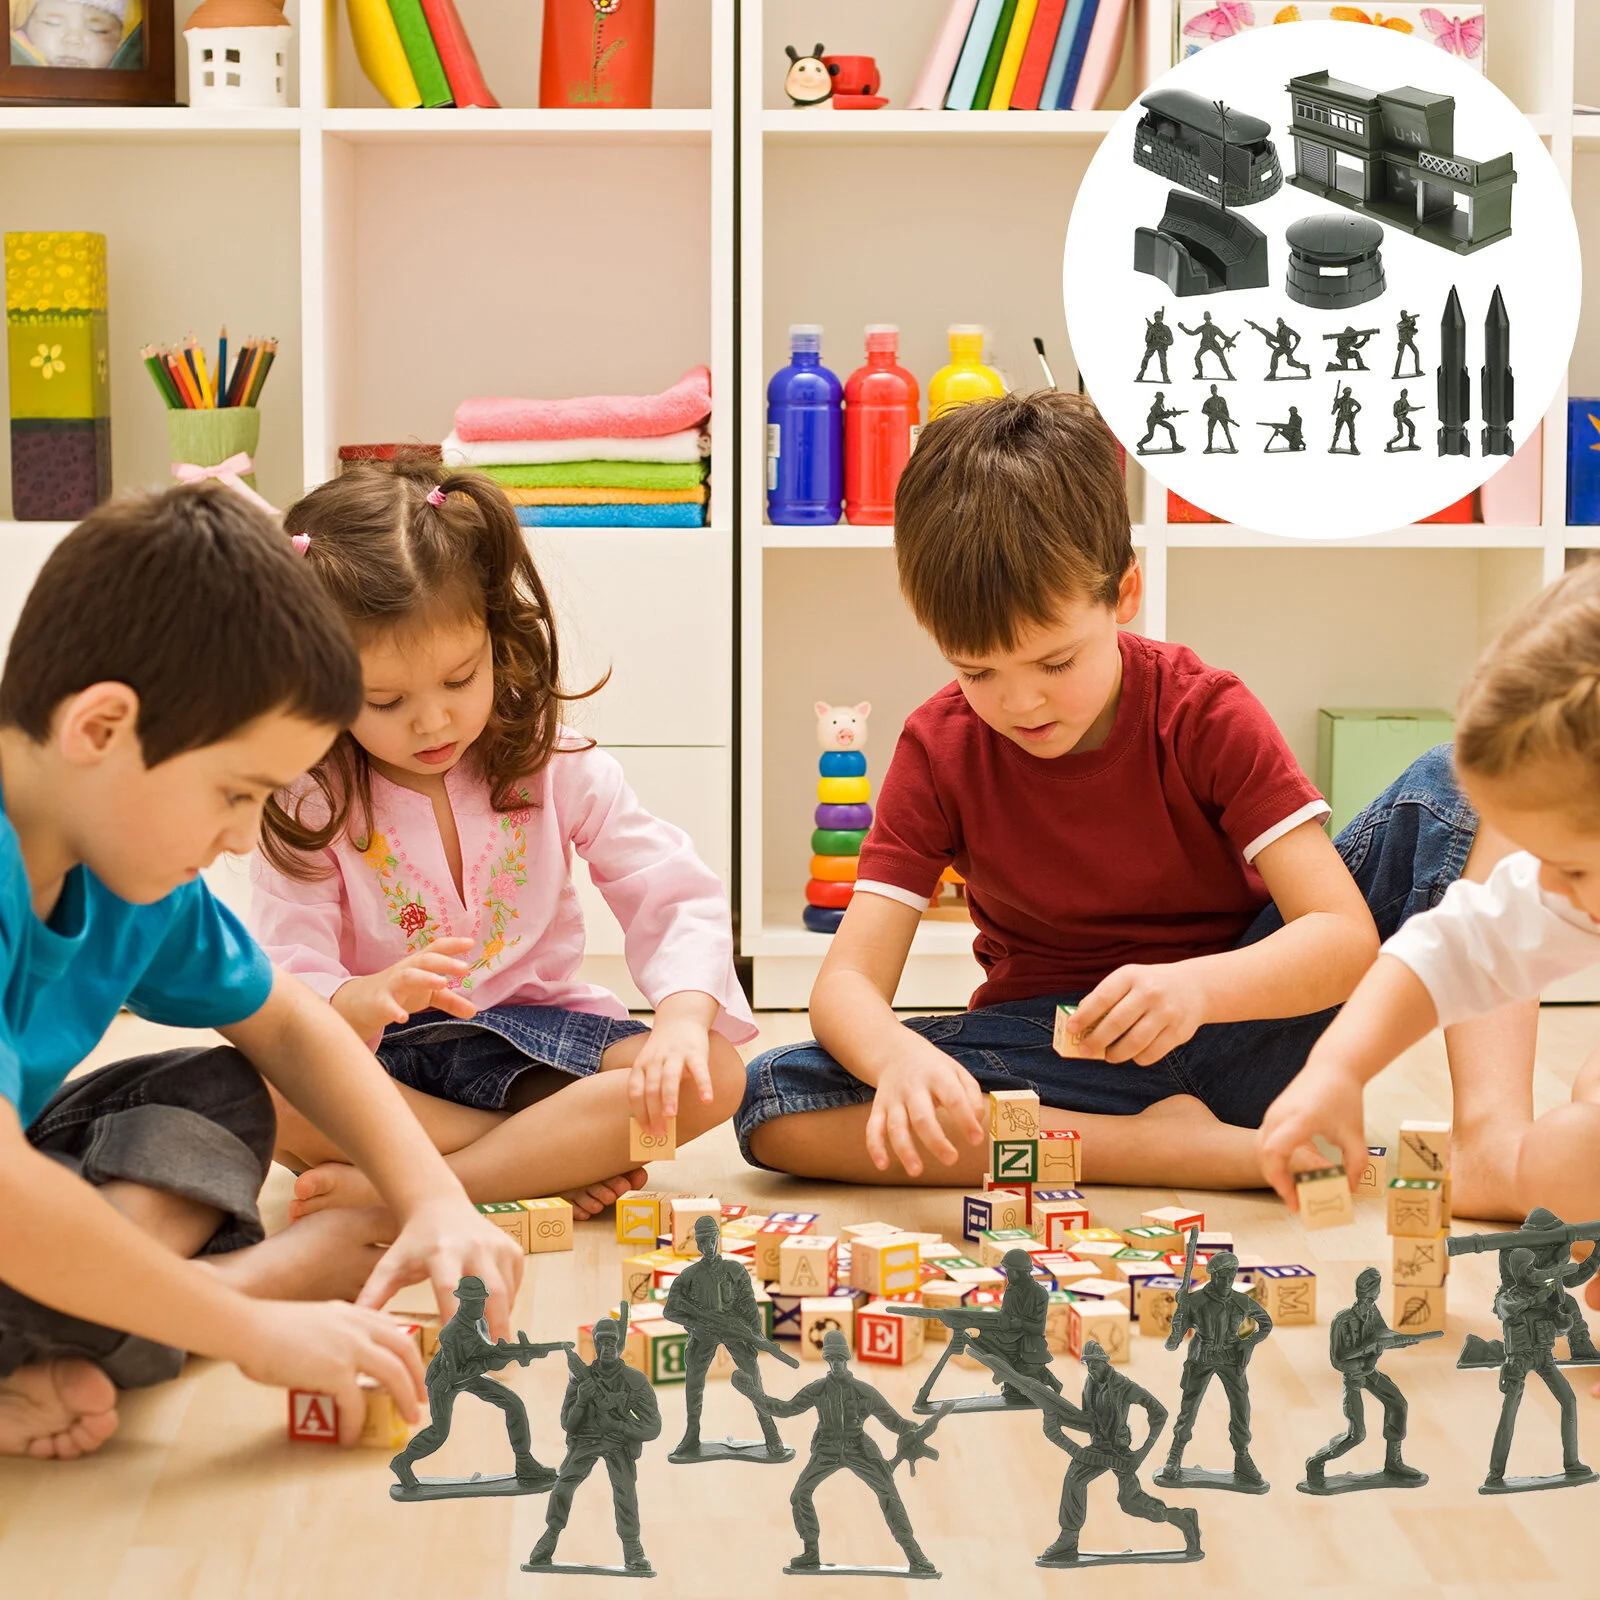 

56pcs Soldier Model Toys Funny Men Model Soldiers Playset Action Figures for Kids Children Play Birthday Party Favors